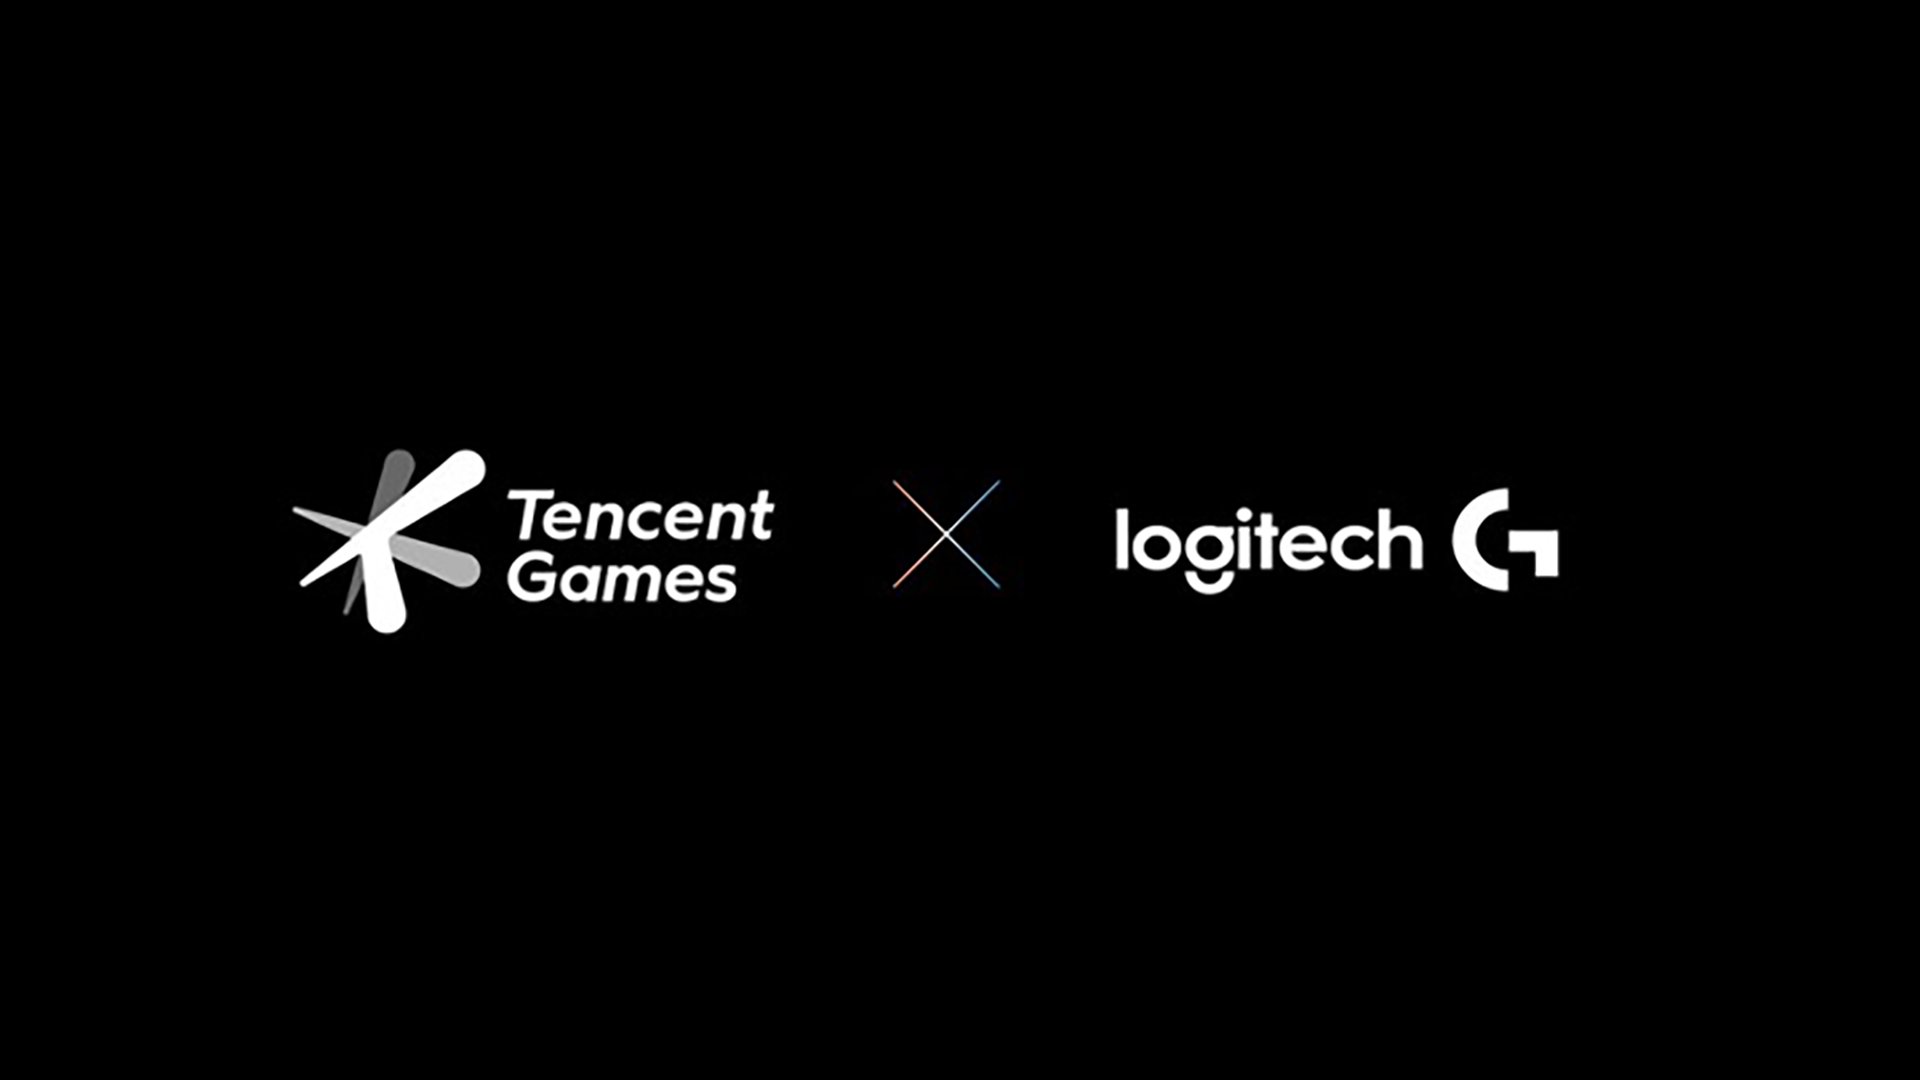 Rettelse pyramide orange Logitech G on Twitter: "We're thrilled to announce an official partnership  with @TencentGames to bring a cloud gaming handheld to market later this  year that will support multiple cloud gaming services. Be